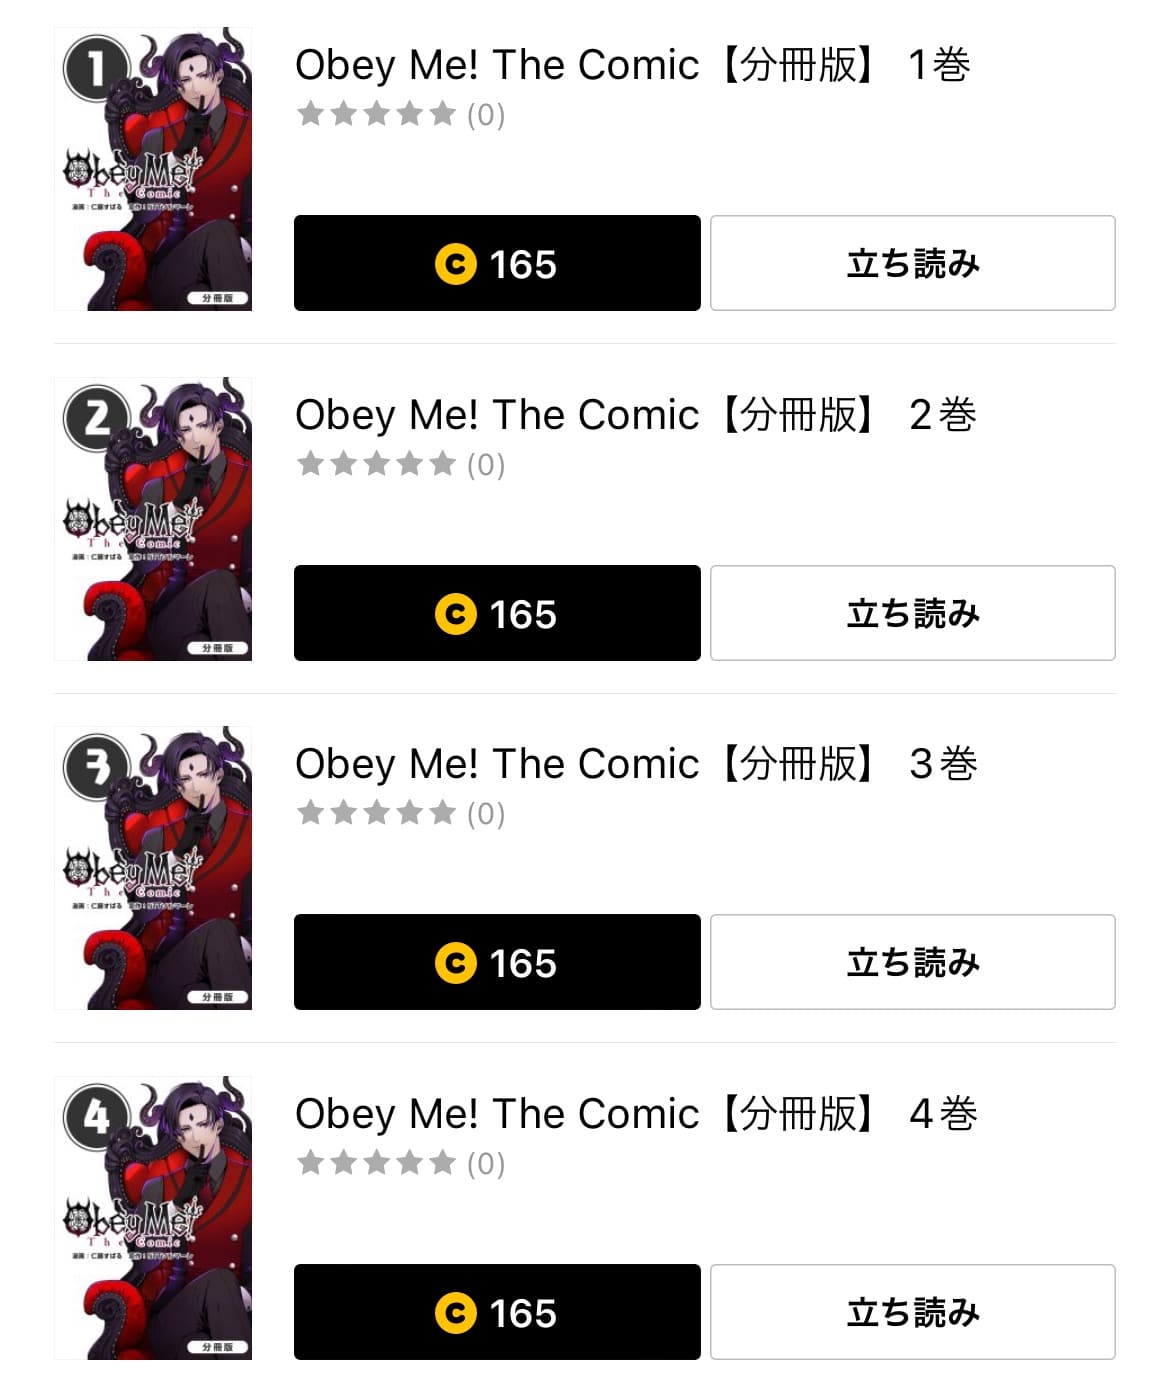 Obey Me! The ComicLINEマンガ